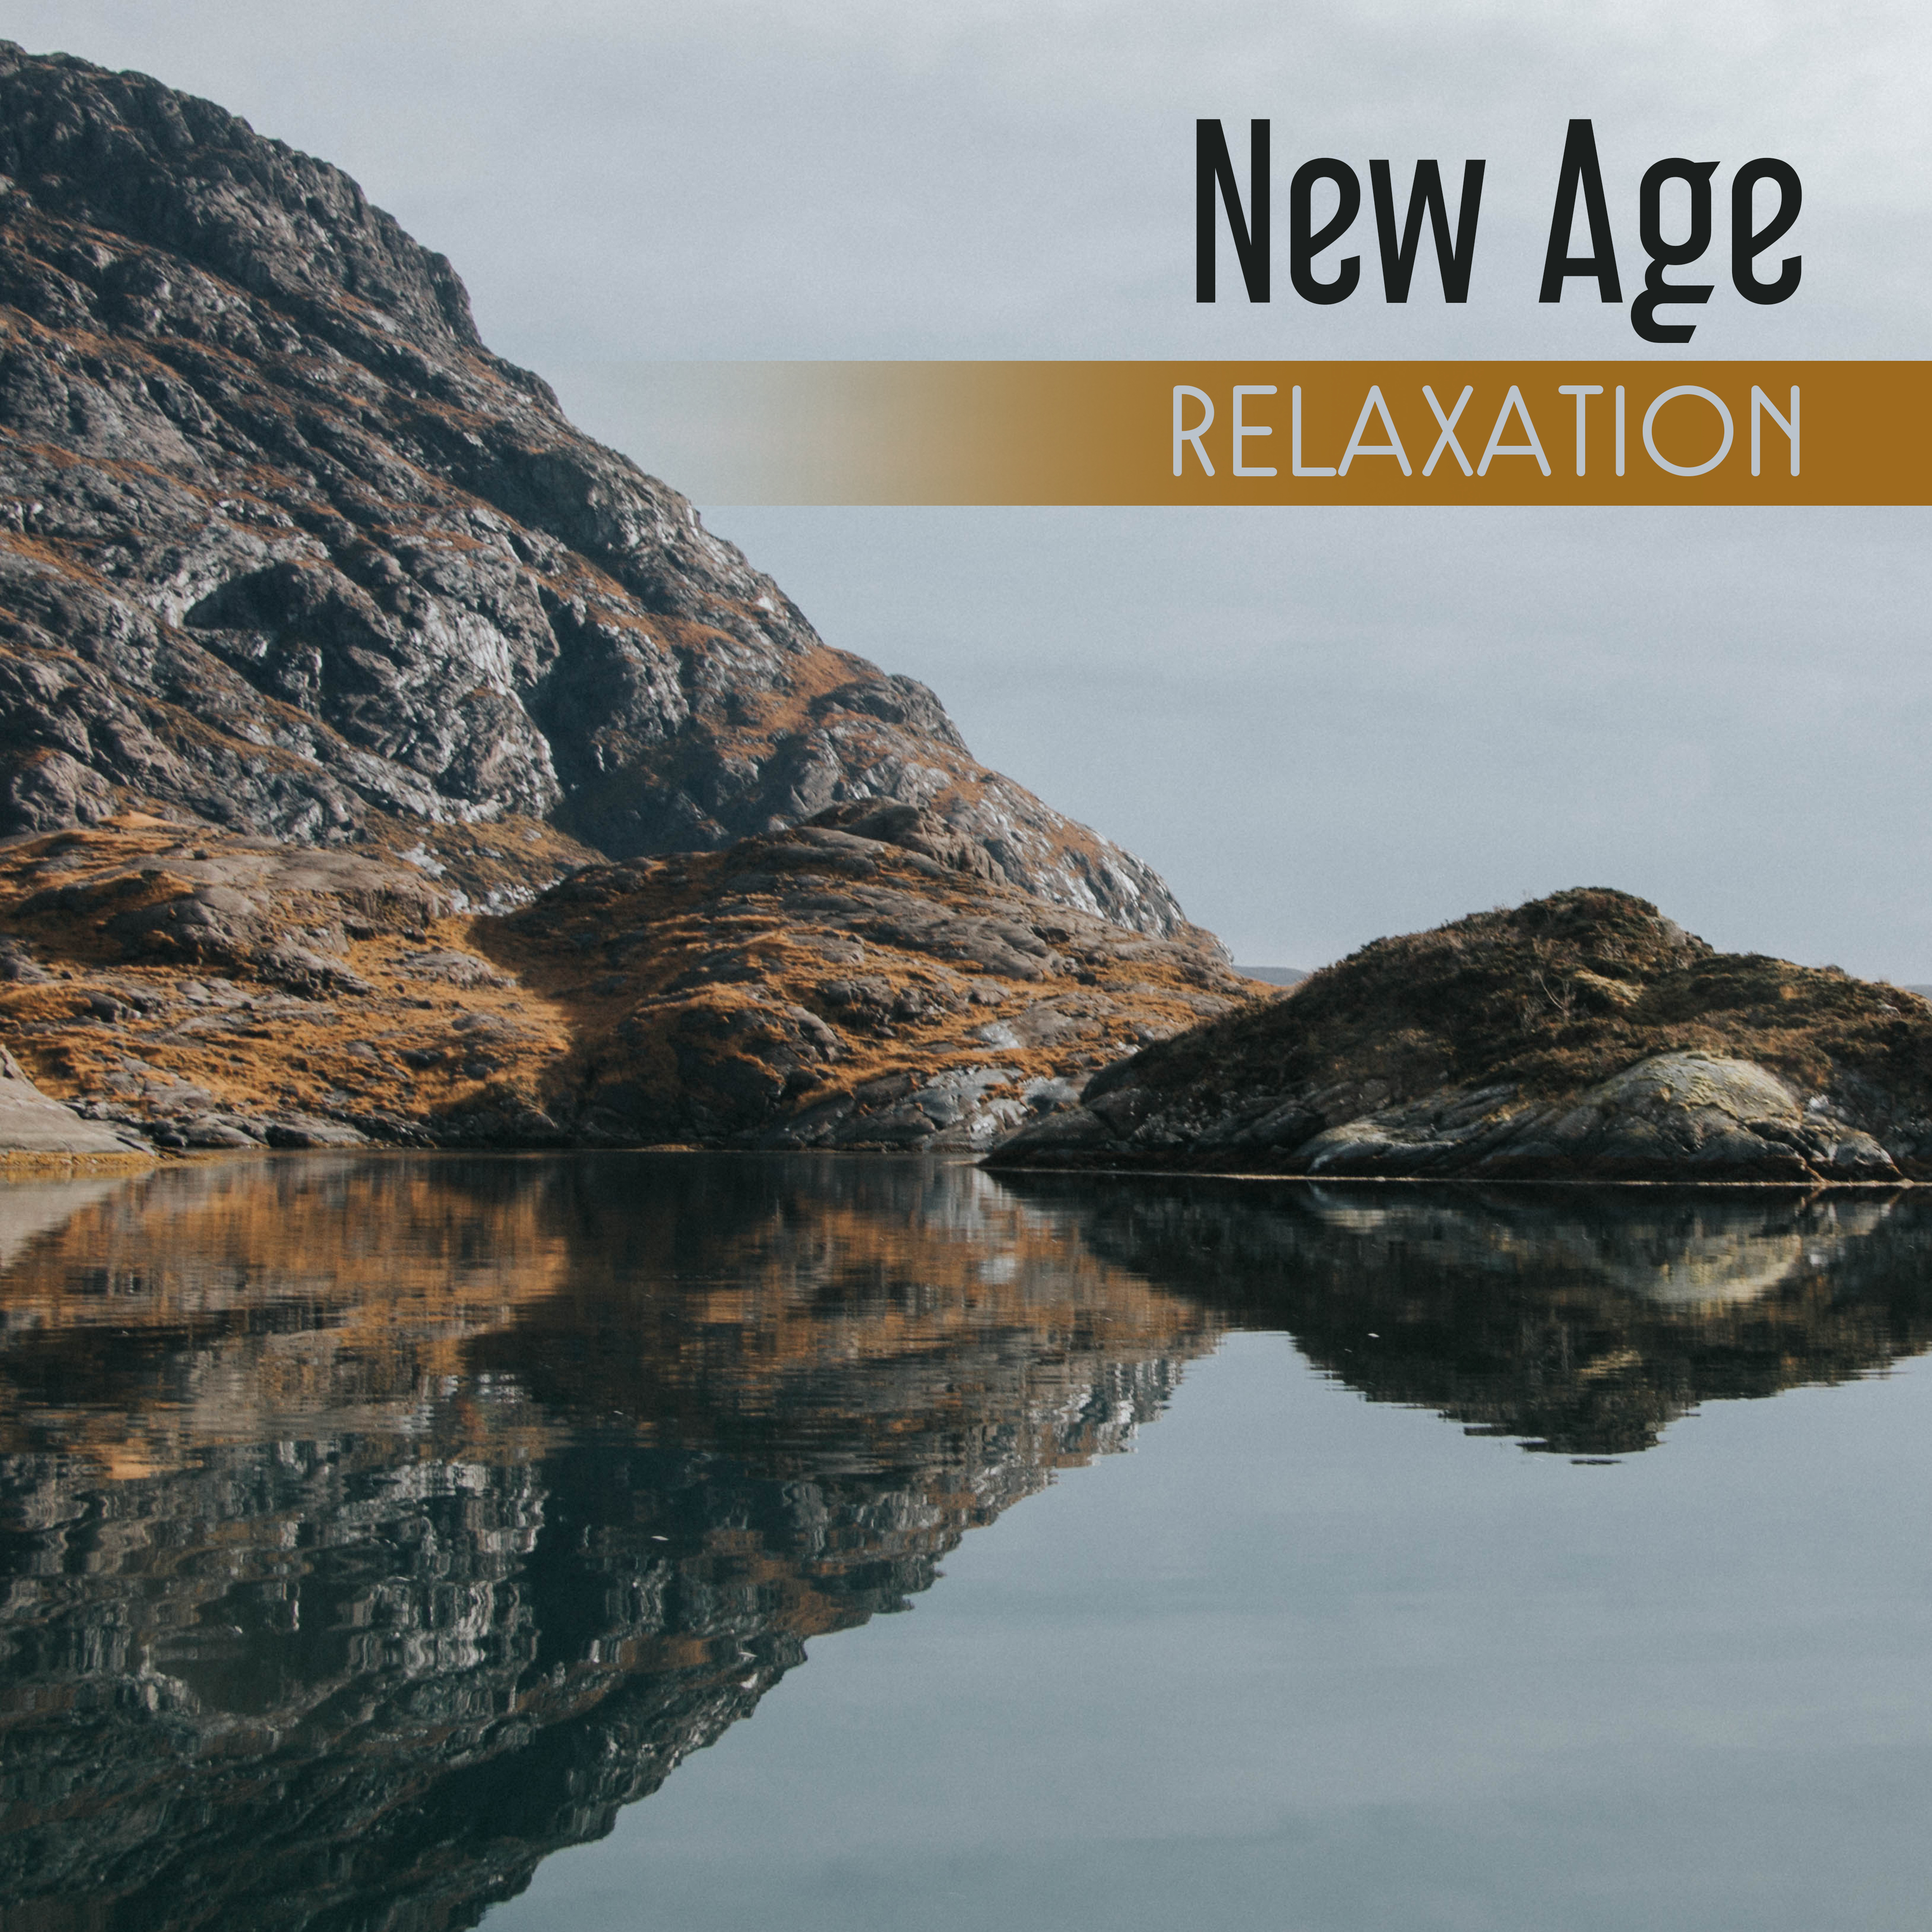 New Age Relaxation  Nature Sounds to Rest, Relaxing Waves, Soothing Piano, Meditation, Sounds of Water, Peaceful Mind